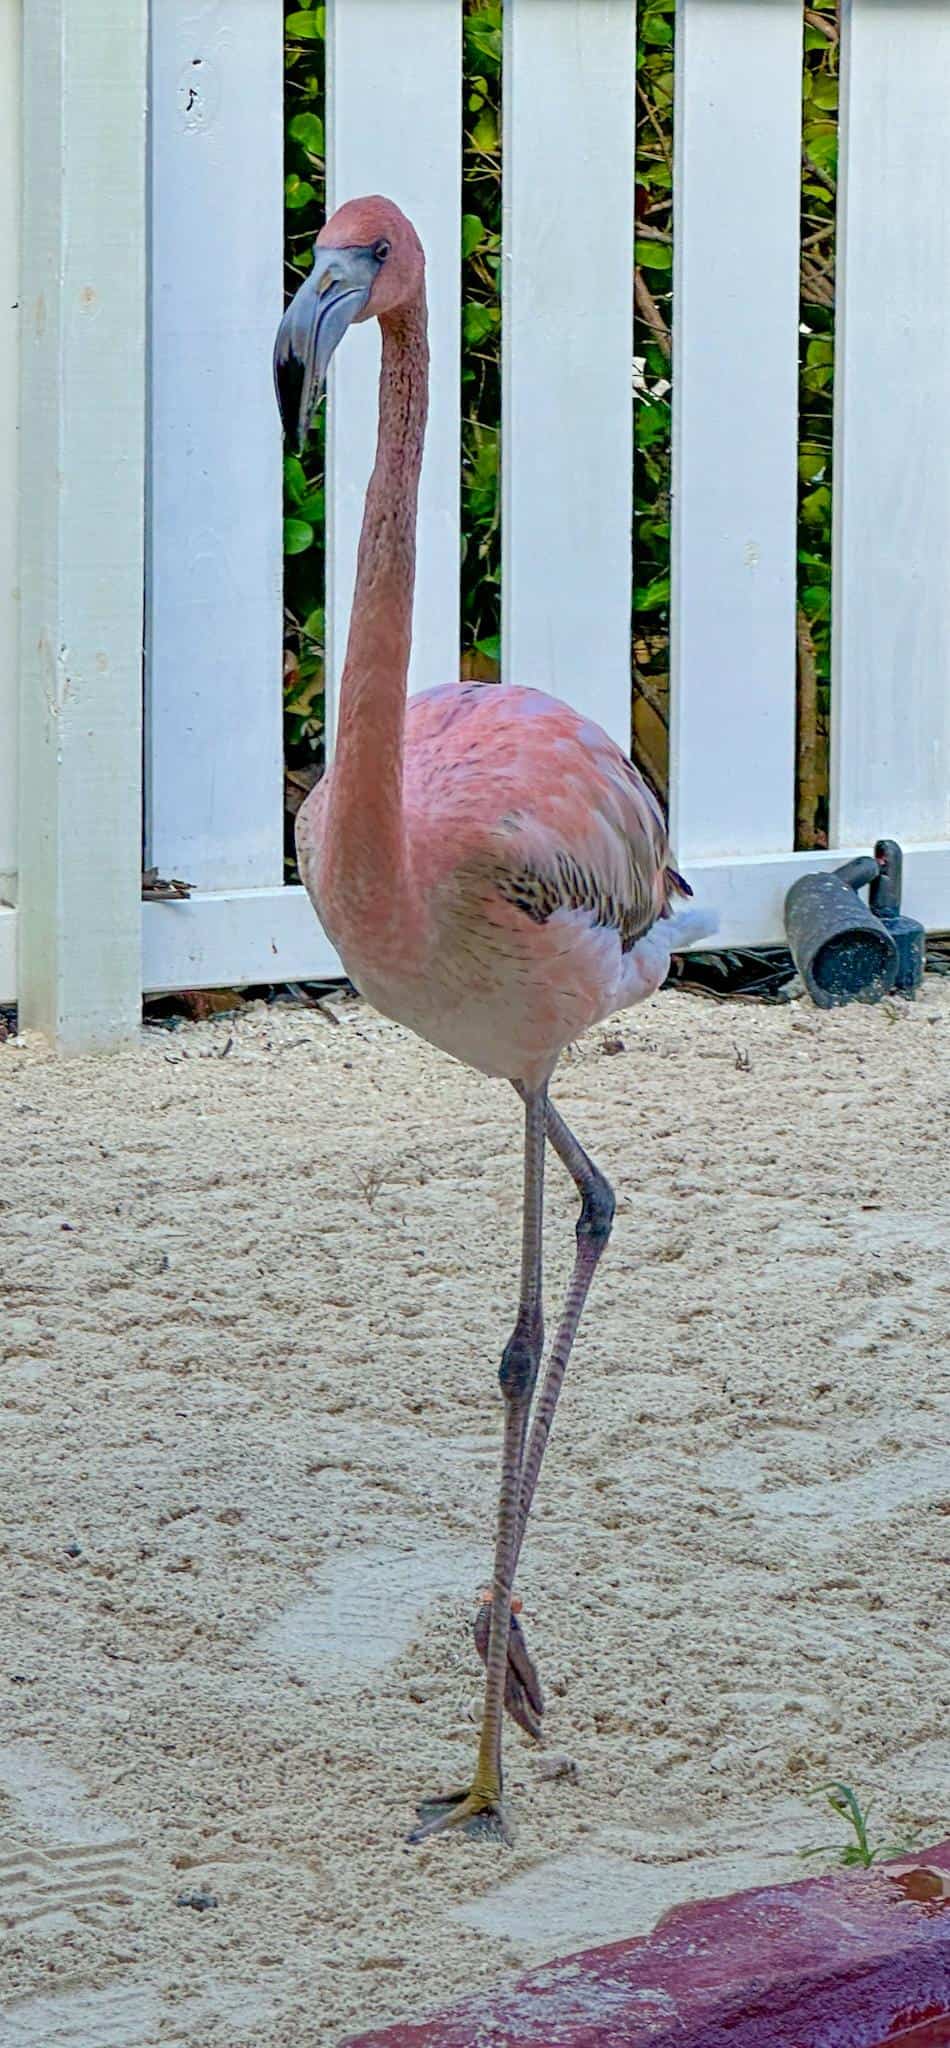 If you are looking for something to do in Nassau, Bahamas, head over to Bahamar and meet some baby flamingos. #whattodoinBahamas #flamingos